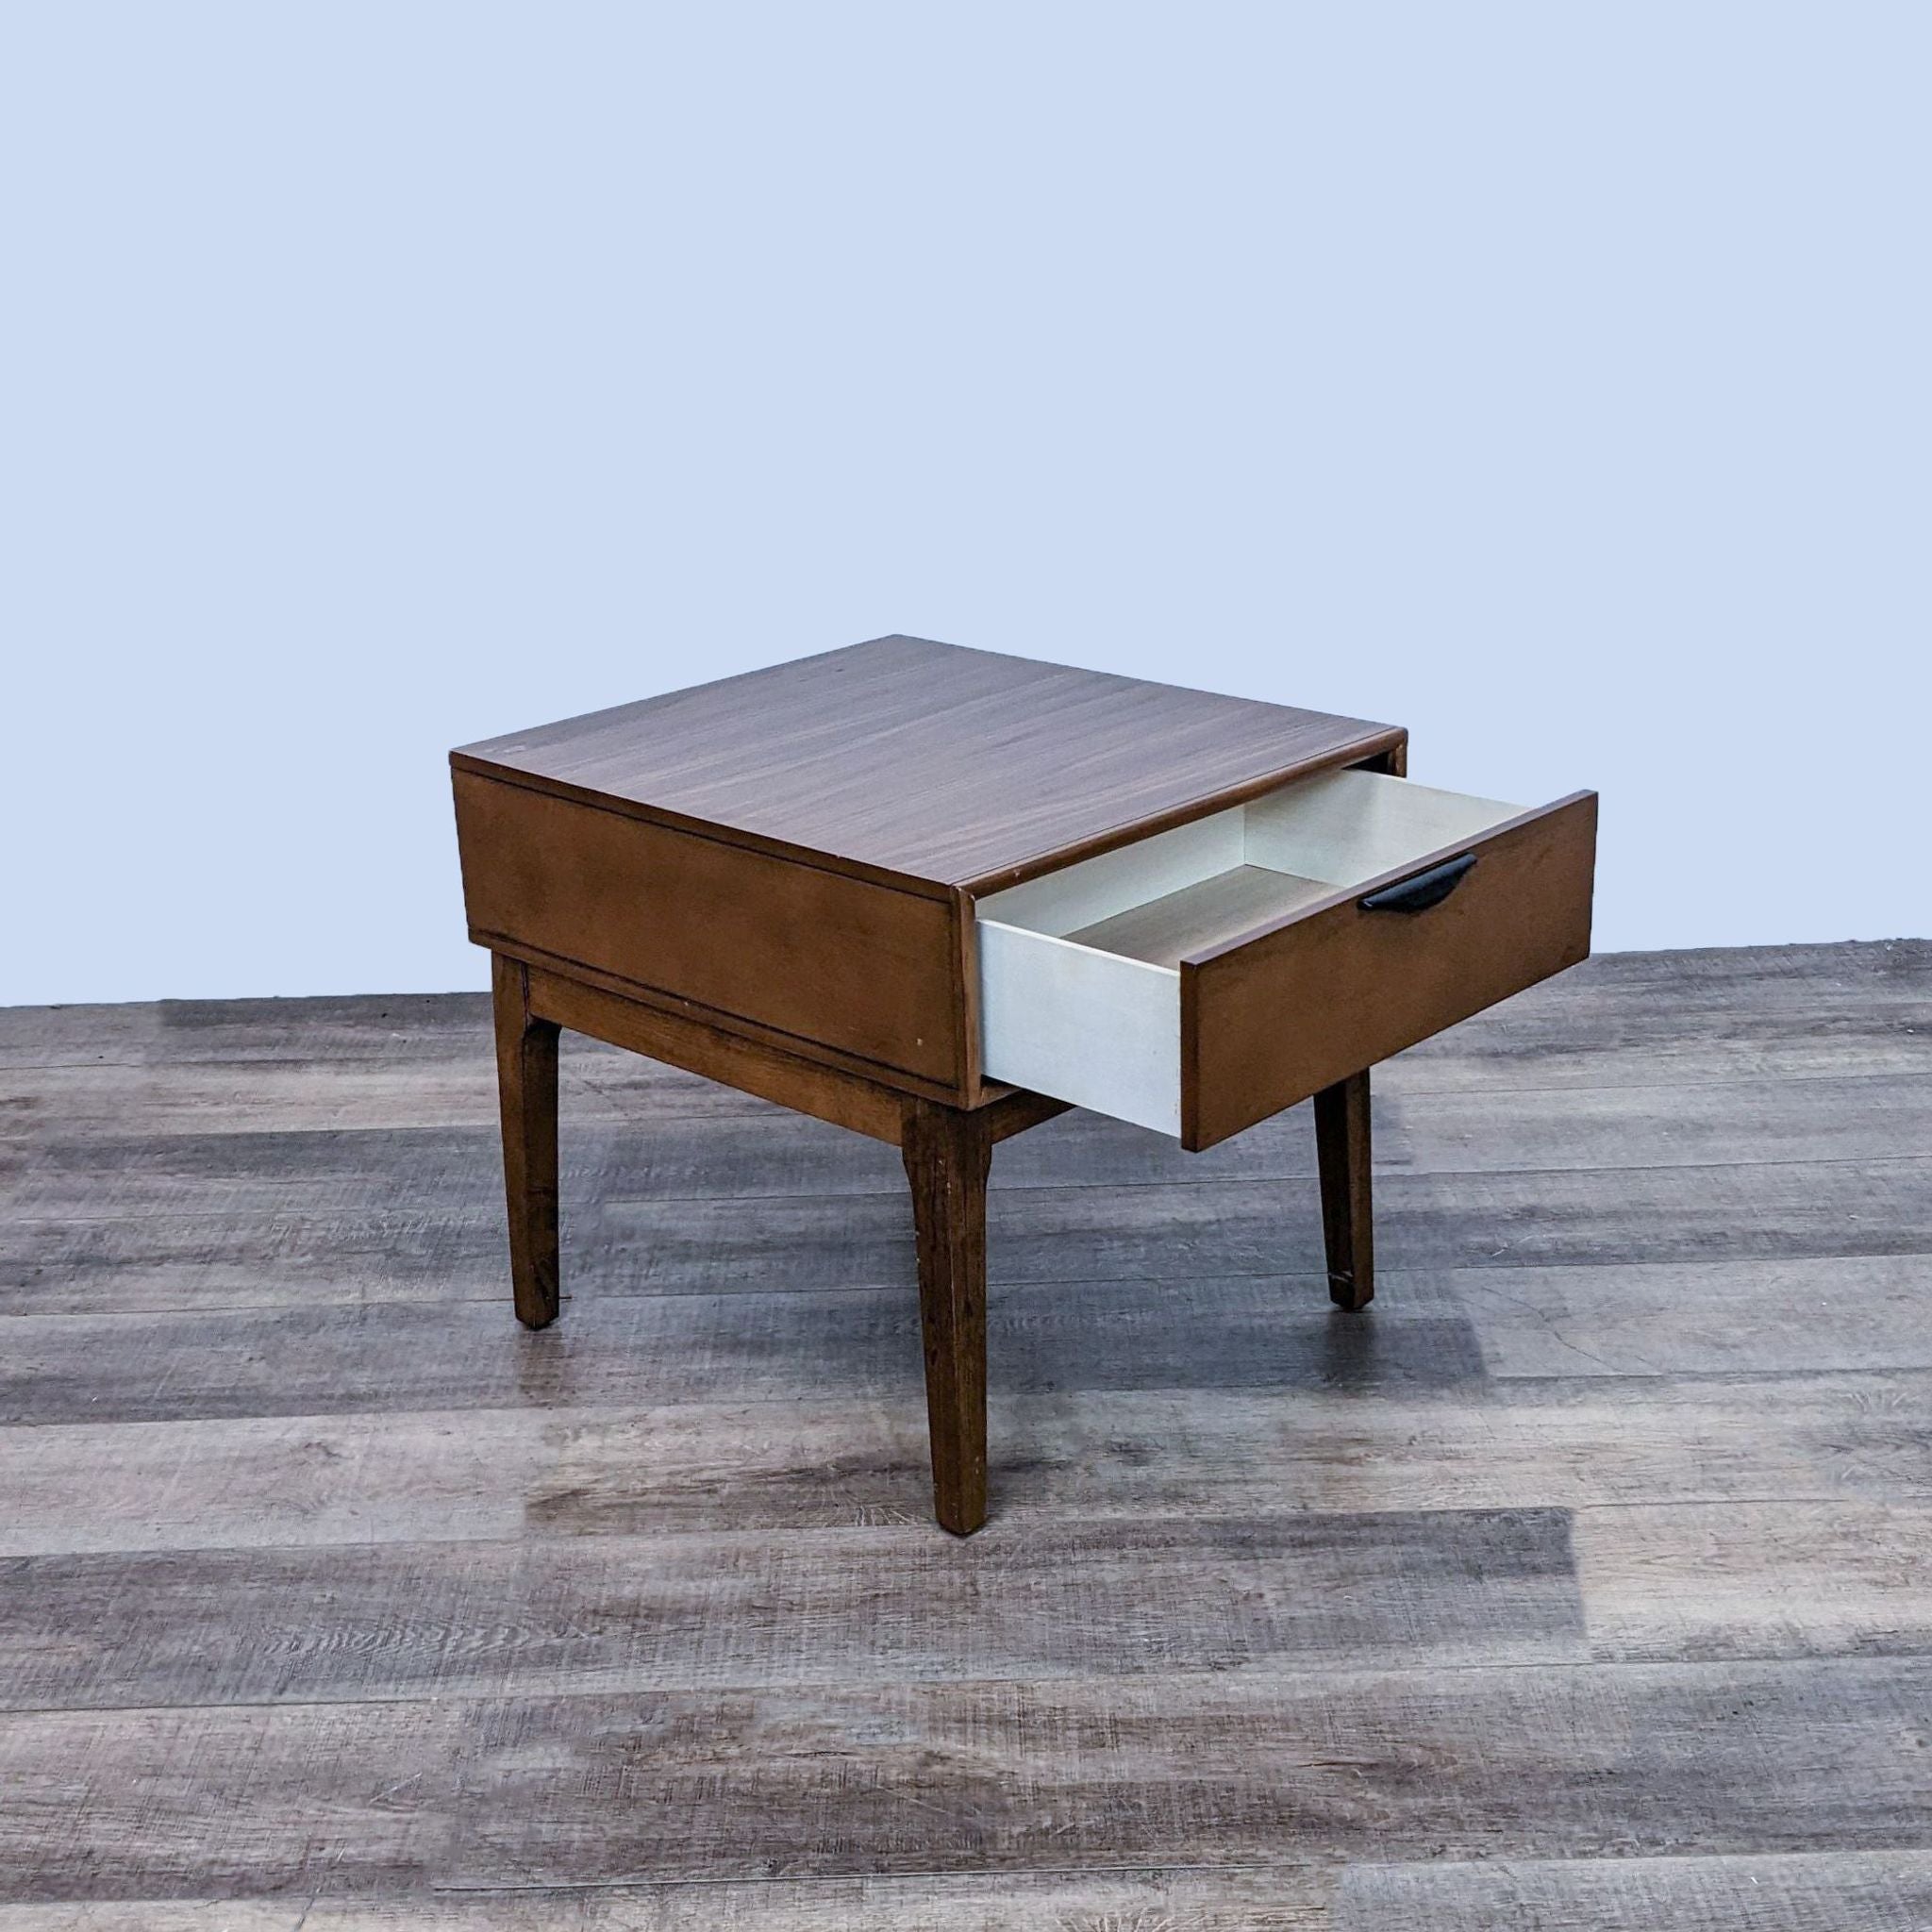 Reperch wooden end table with an open drawer revealing a white interior, set on a wood grain floor with a plain backdrop.